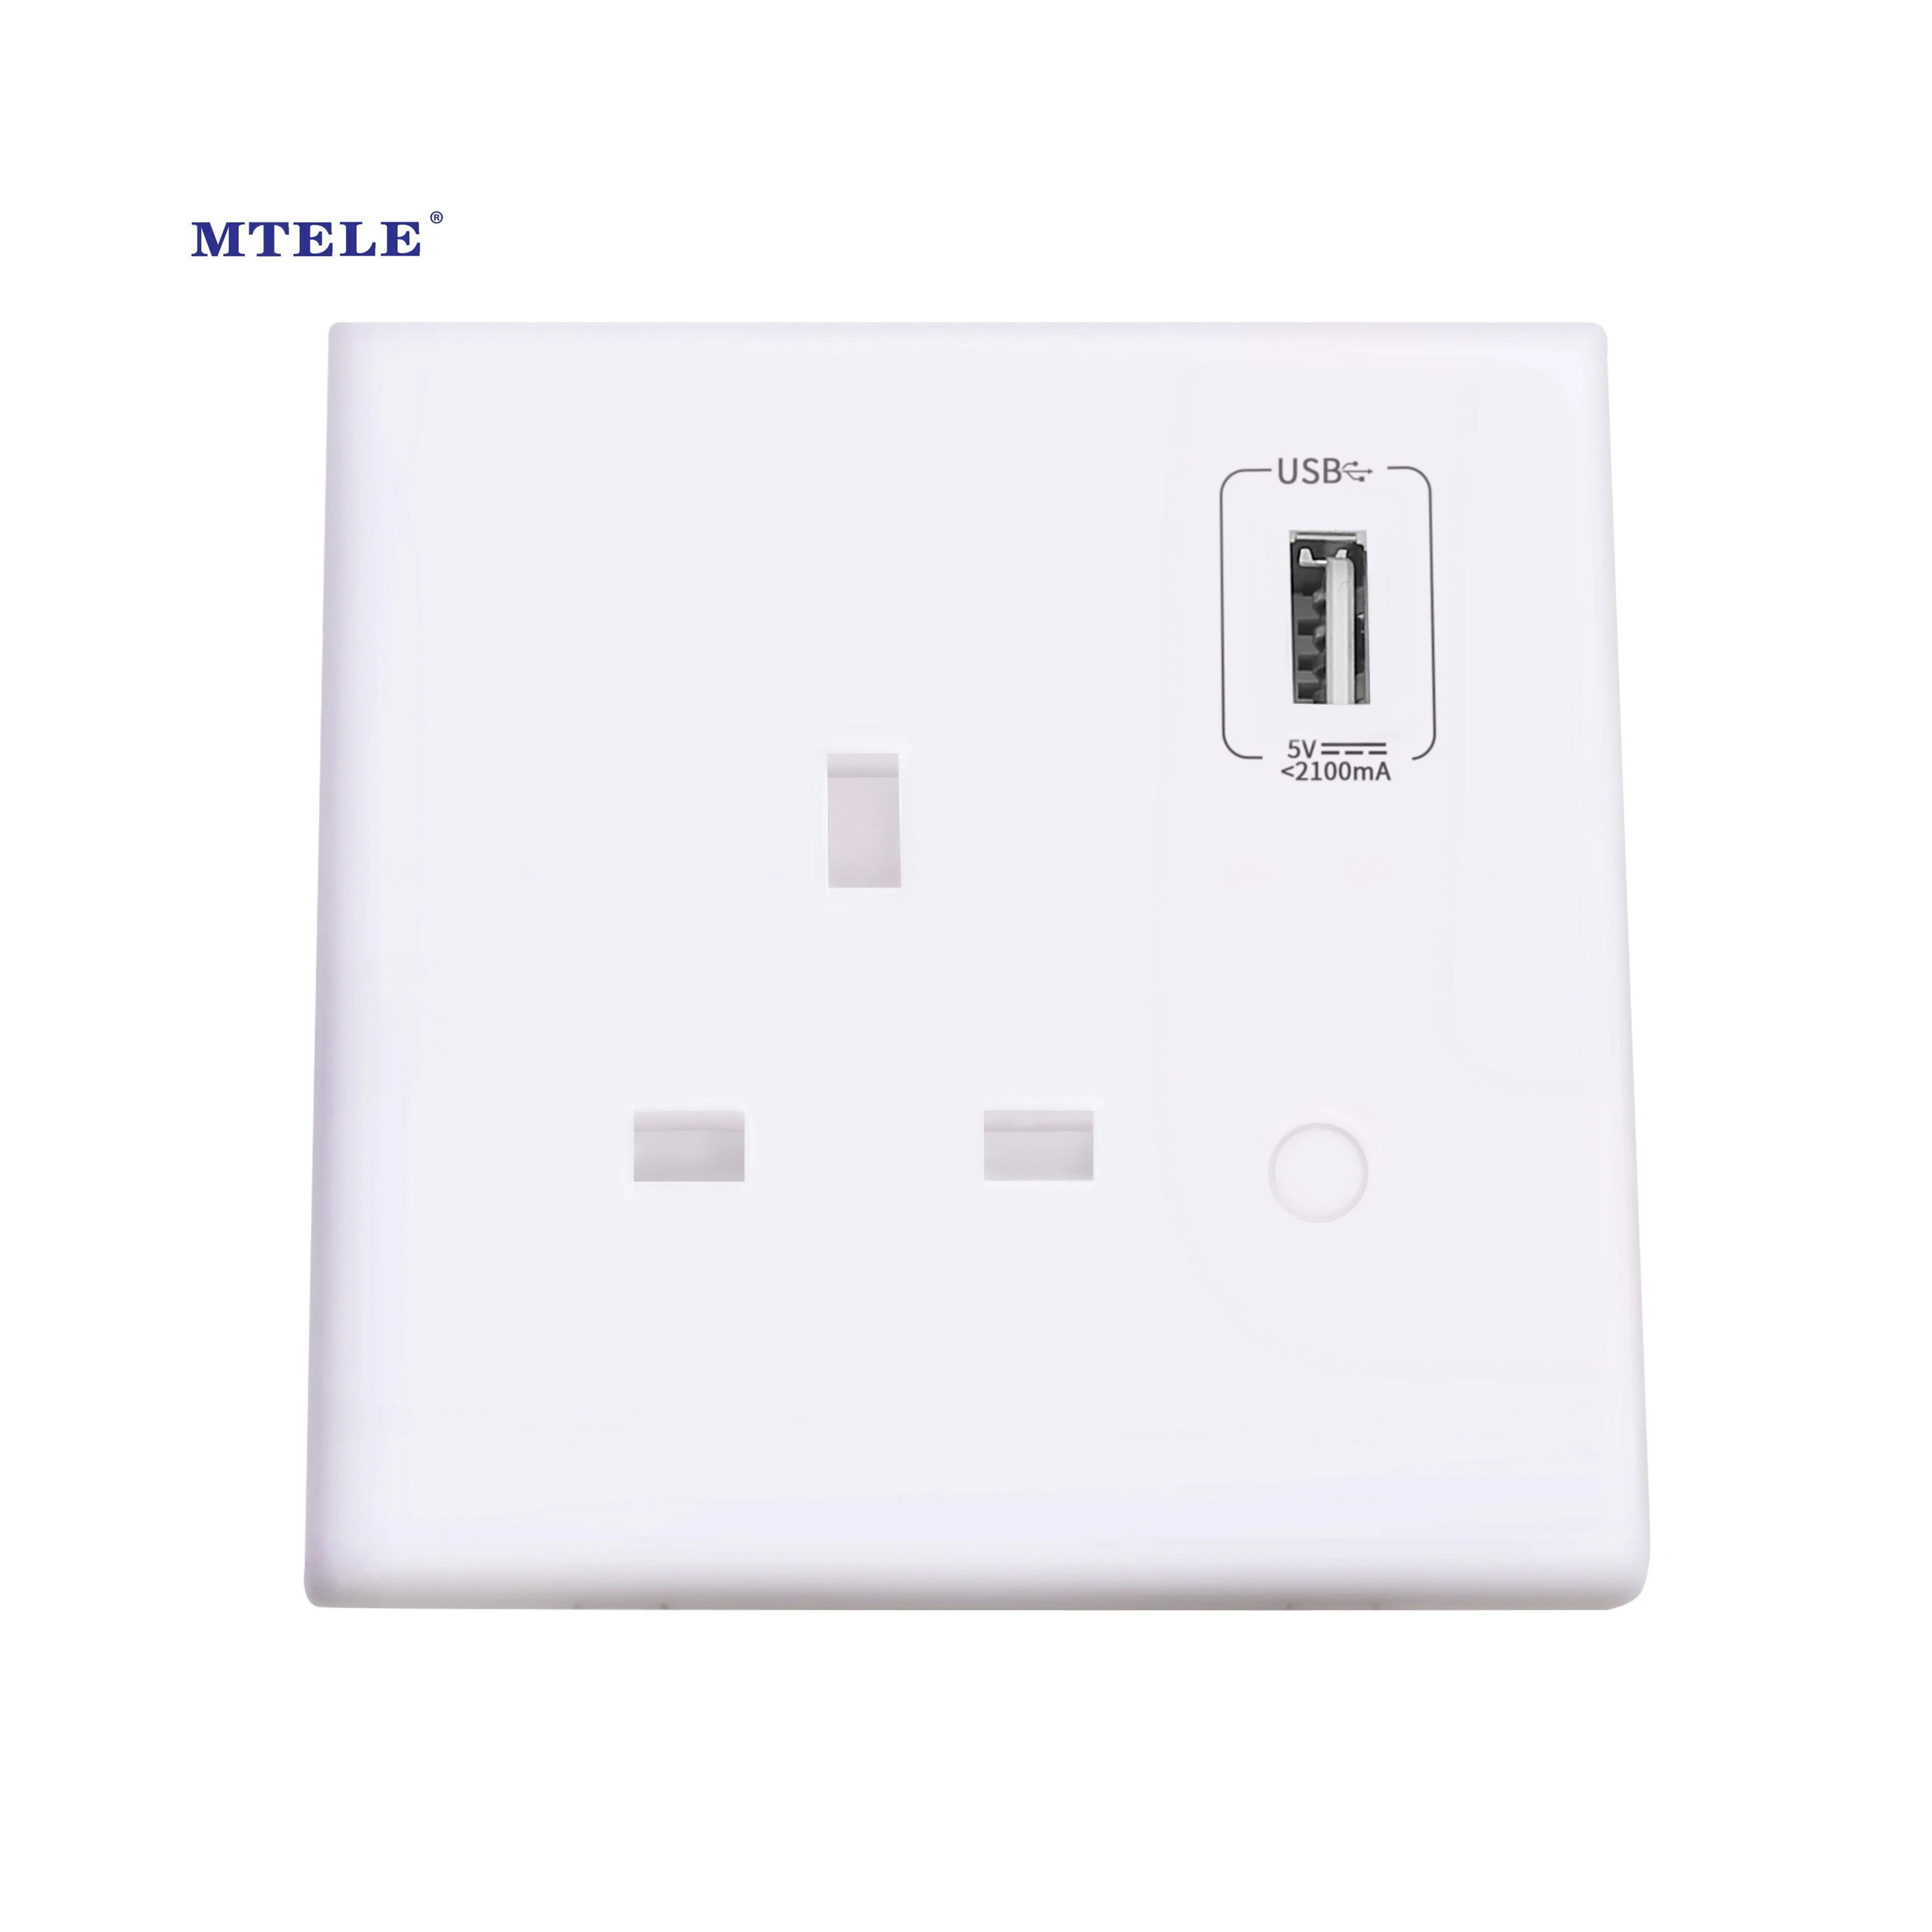 Wall Socket With electricity monitoring and power statistics Smart wifi wall outlet plug  Usb  Plugs Sockets uk